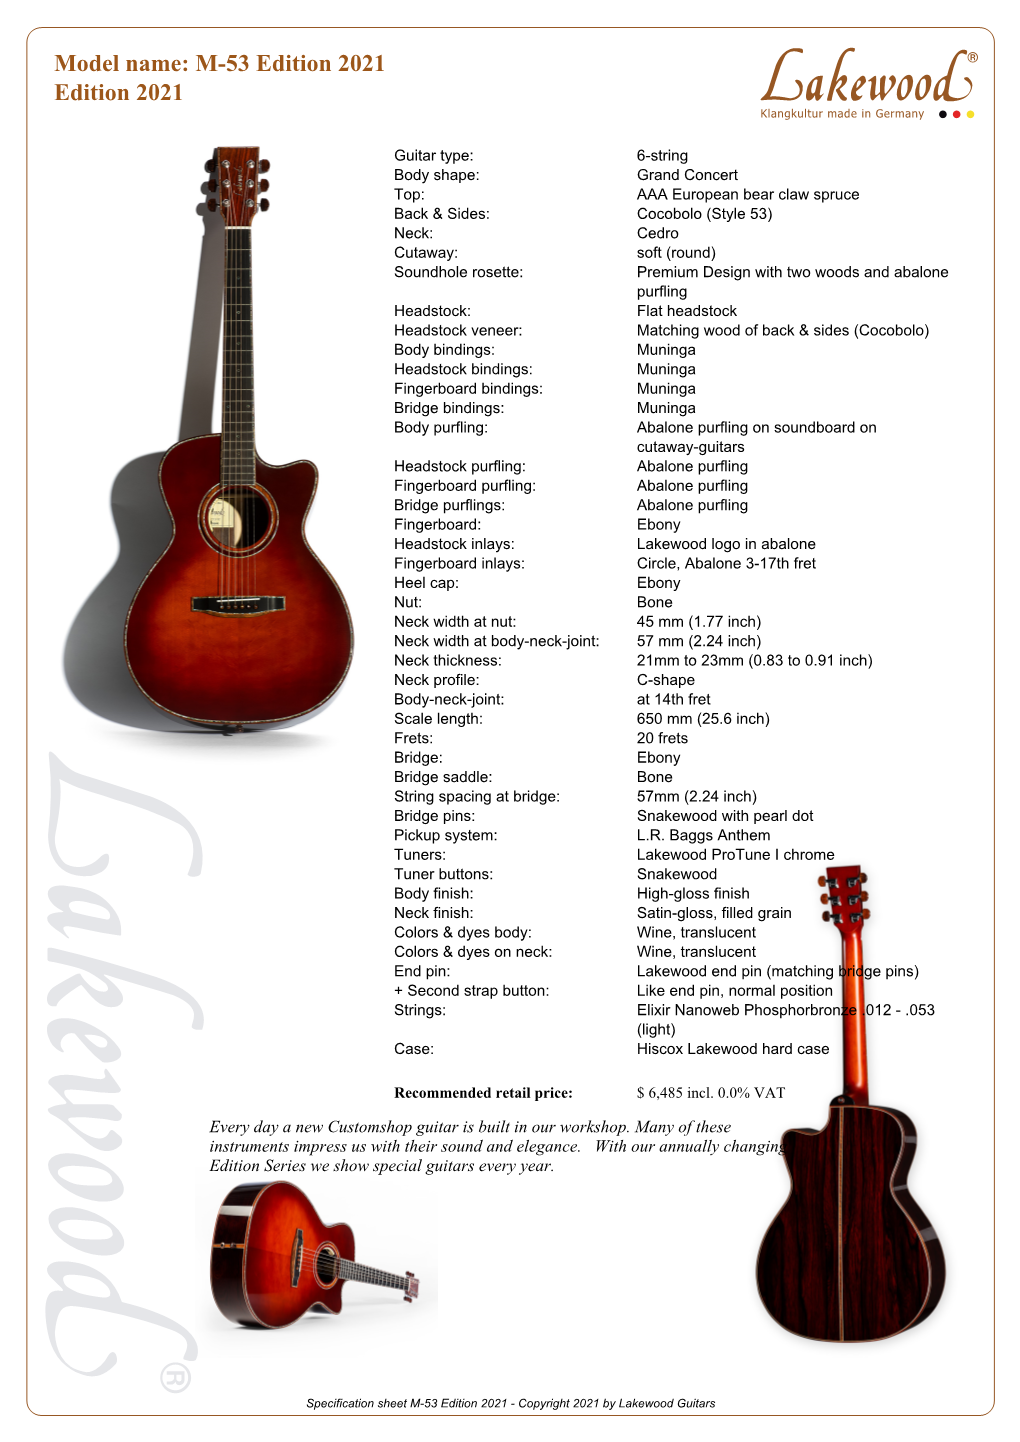 Specification Sheet M-53 Edition 2021 - Copyright 2021 by Lakewood Guitars